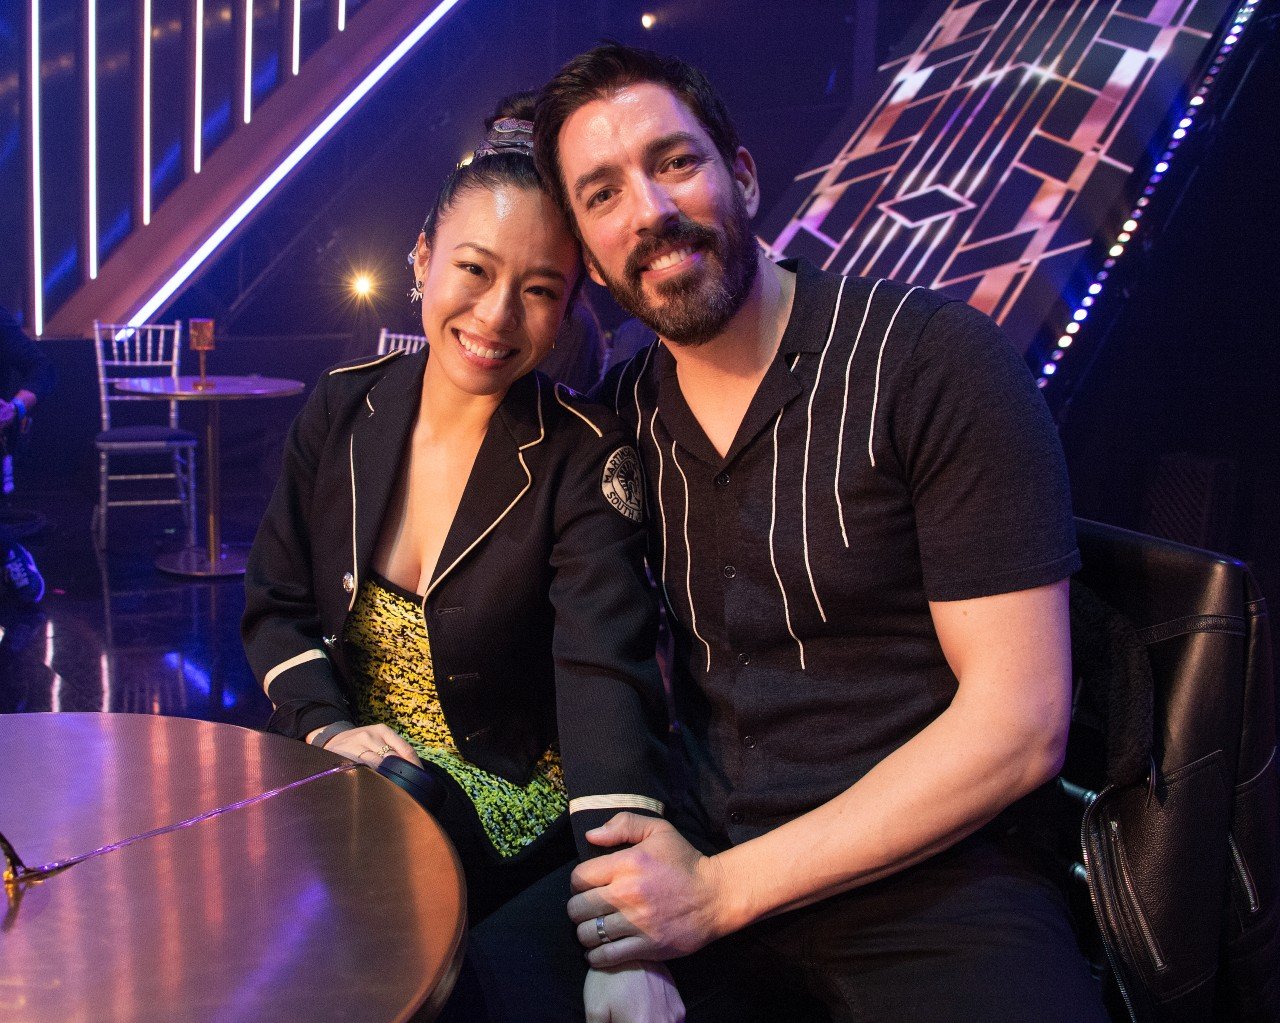 Linda Phan and Jonathan Scott sit next to each other and smile.